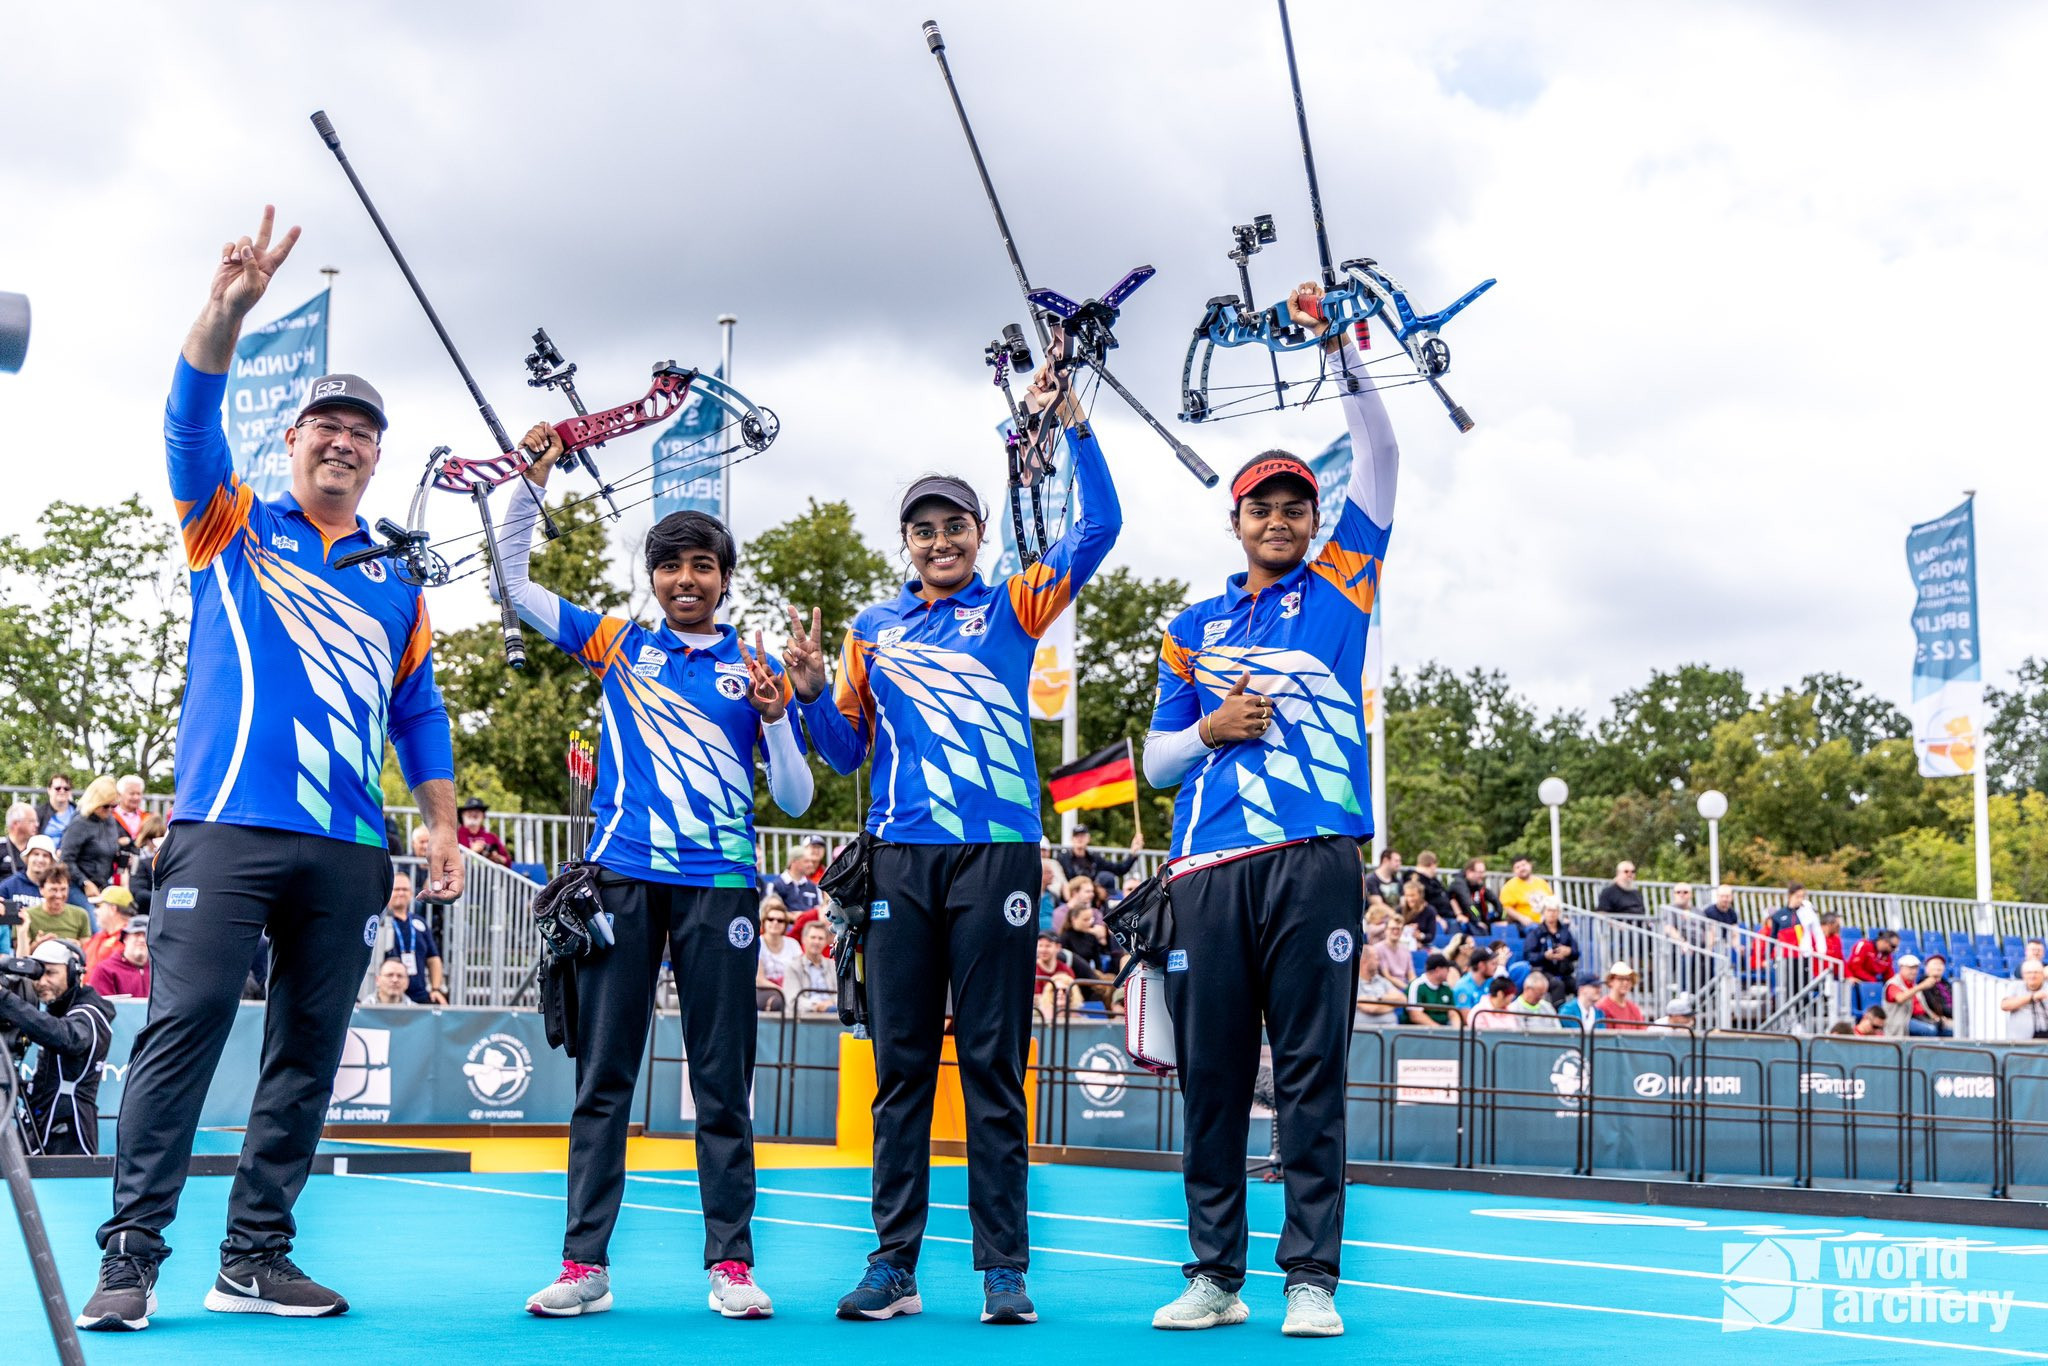 India won its first ever World Archery Championships gold medal today ©World Archery/Twitter